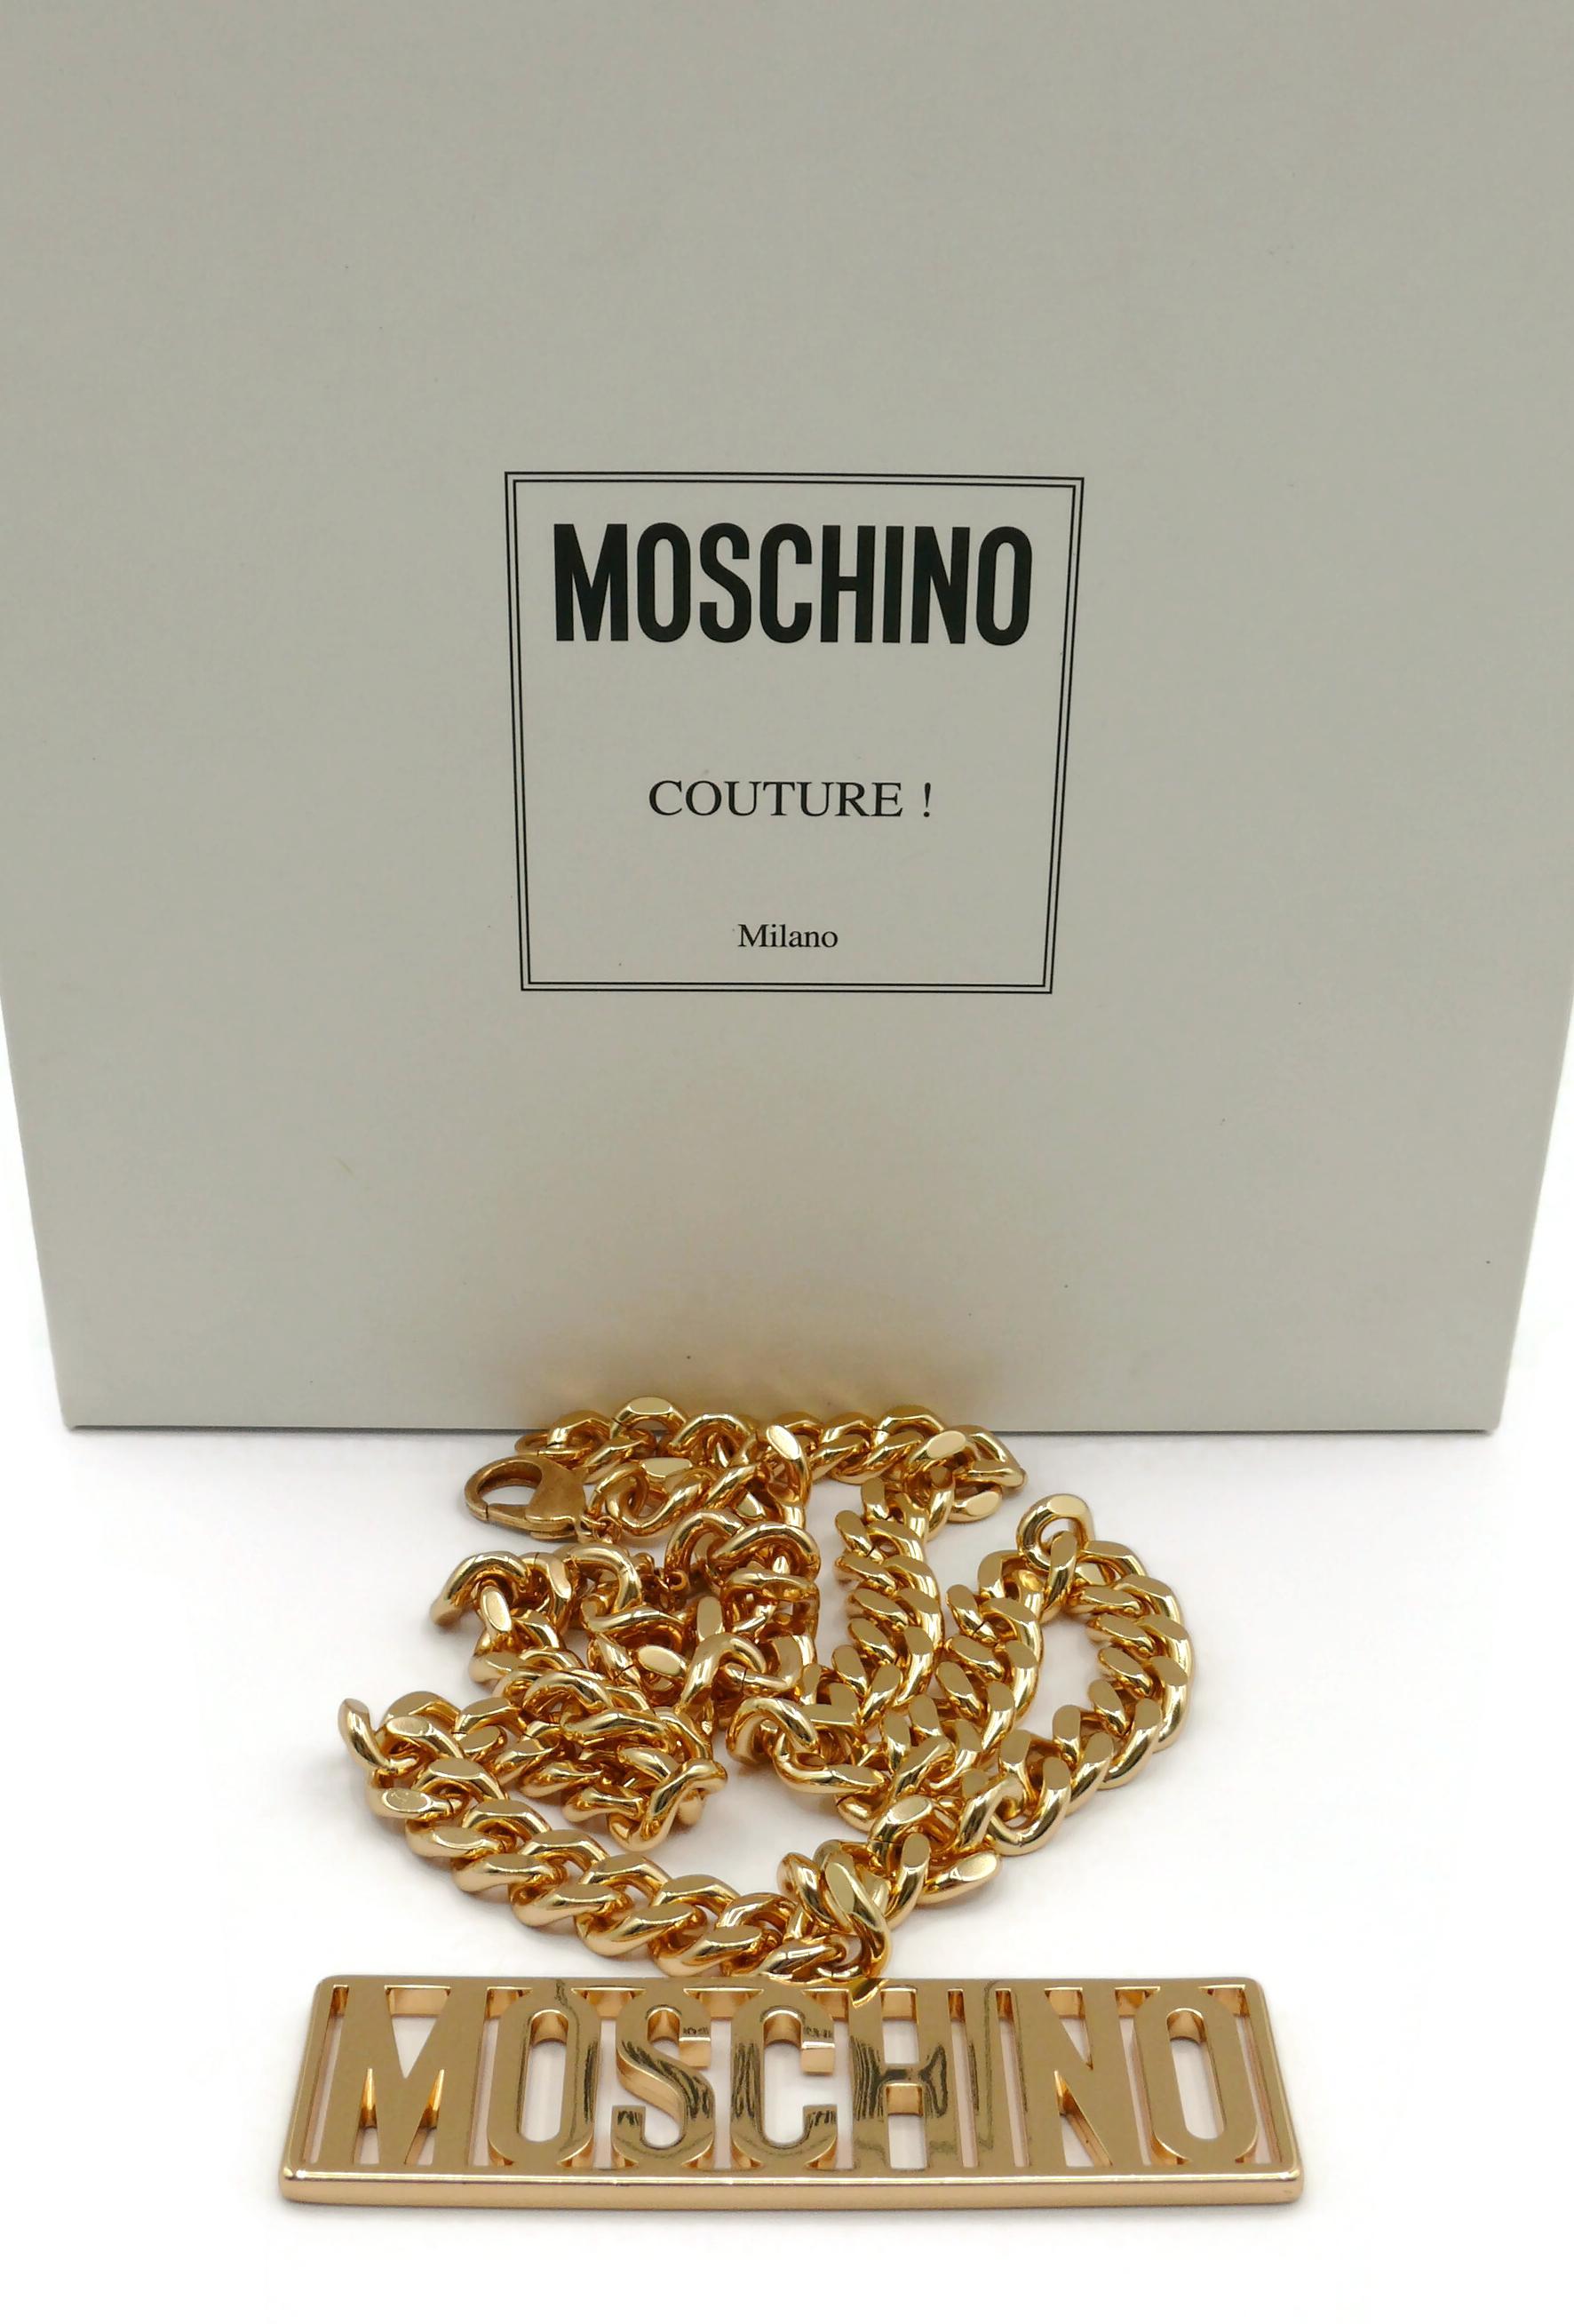 MOSCHINO by JEREMY SCOTT gold tone chain necklace featuring a rectangular MOSCHINO logo pendant.

Autumn/Winter 2014 Collection.

Lobster clasp closure.

Embossed MOSCHINO Made in Italy.

Has weight on it (310 grams) !

Indicative measurement :